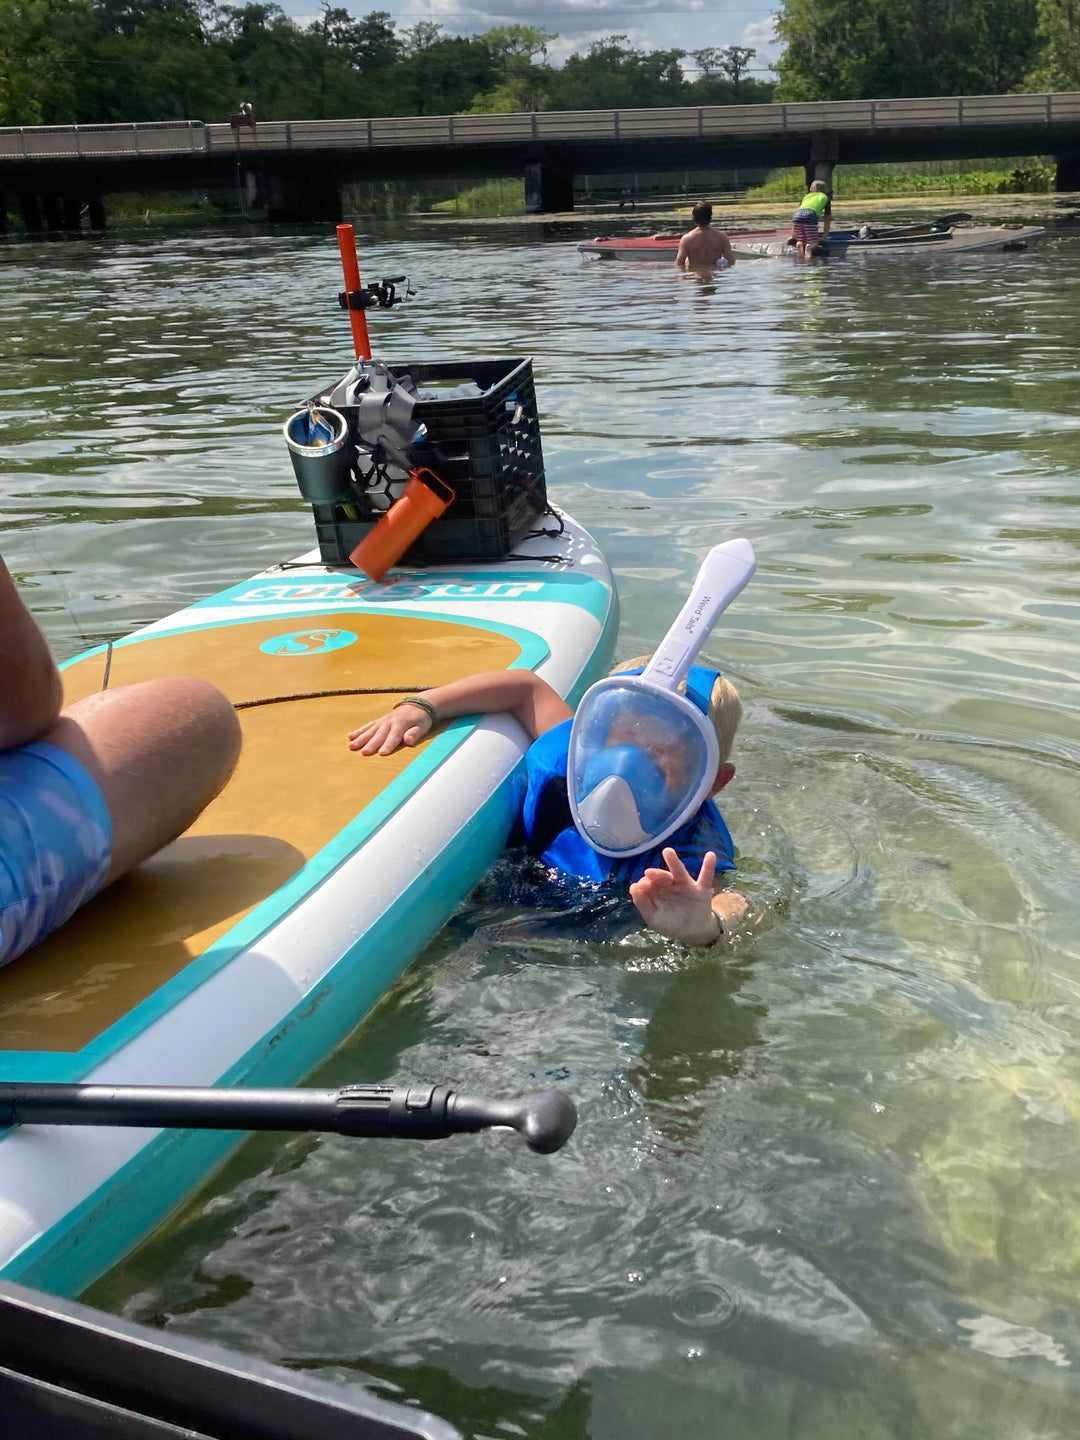 Things to Look for while Paddle Boarding with Kids